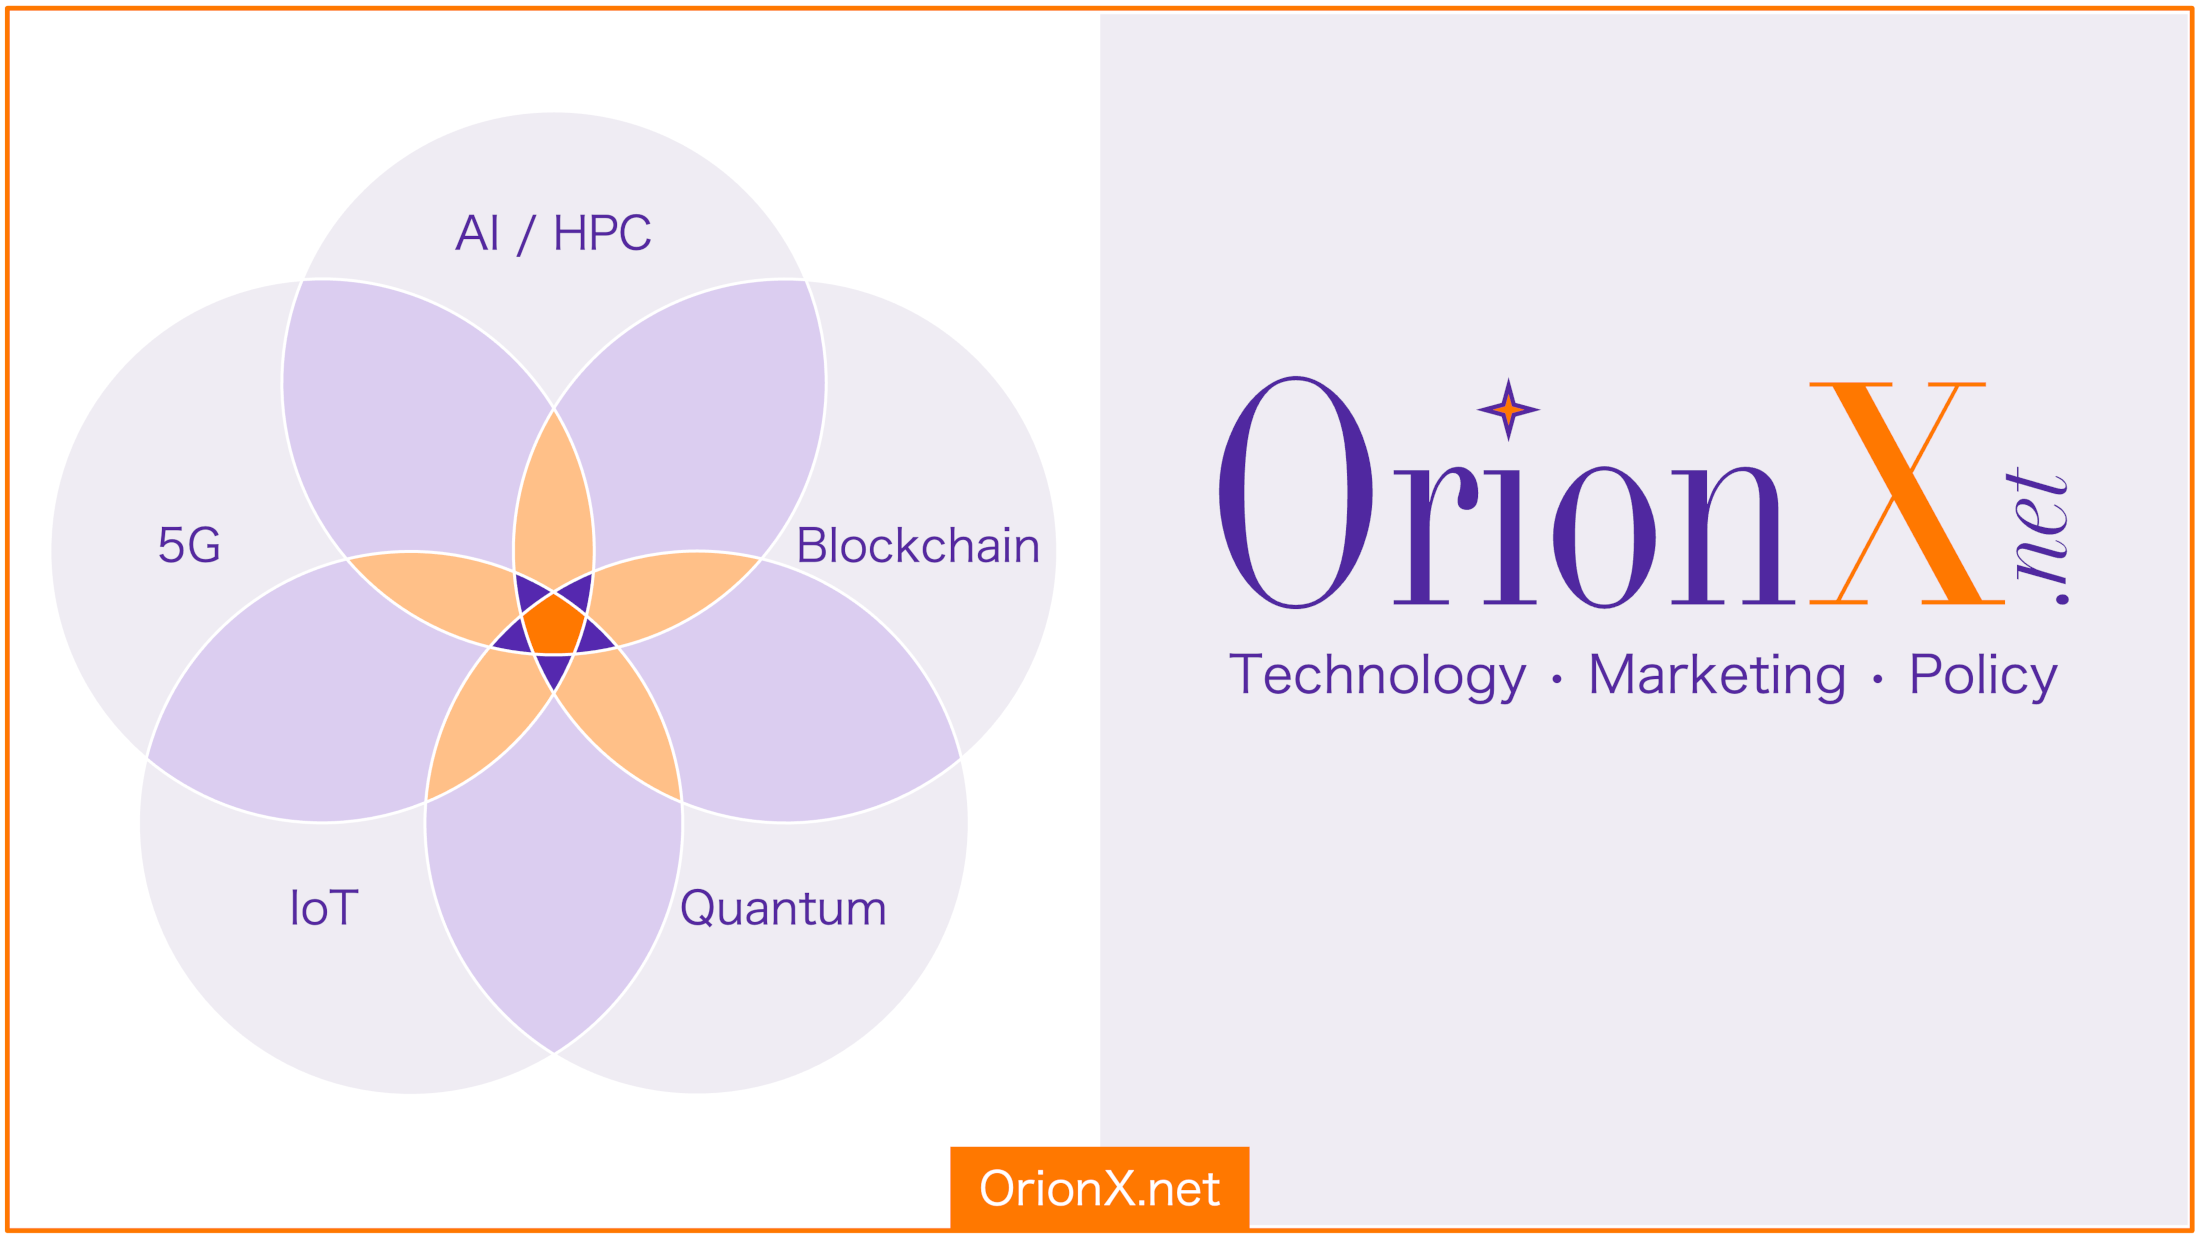 Orionx Focus Ares + Technology Marketing Policy